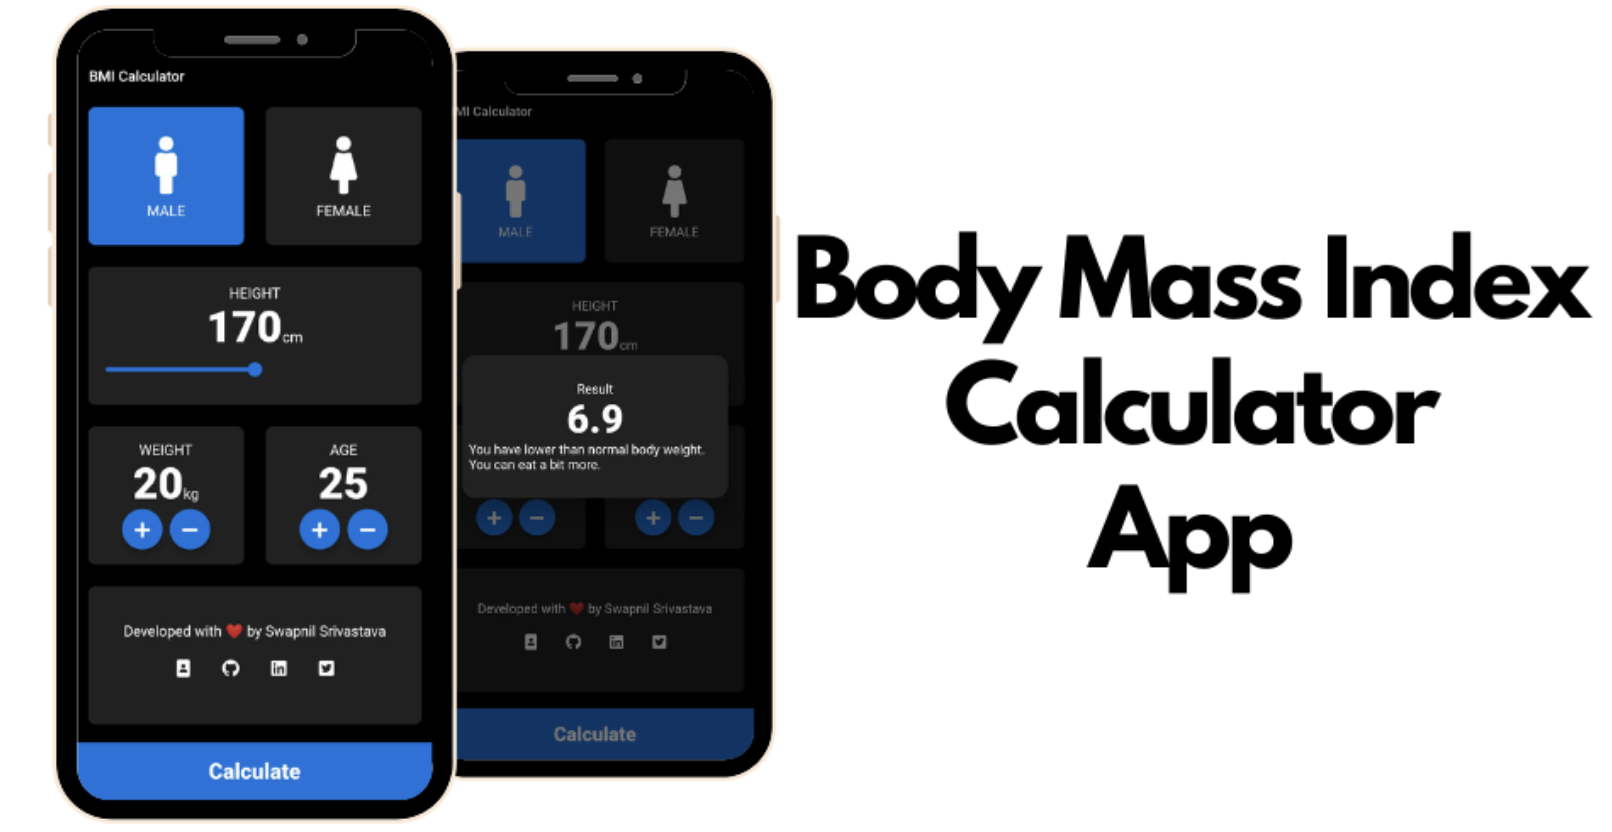 Simple BMI Calculator app which calculated Body Mass Index using flutter